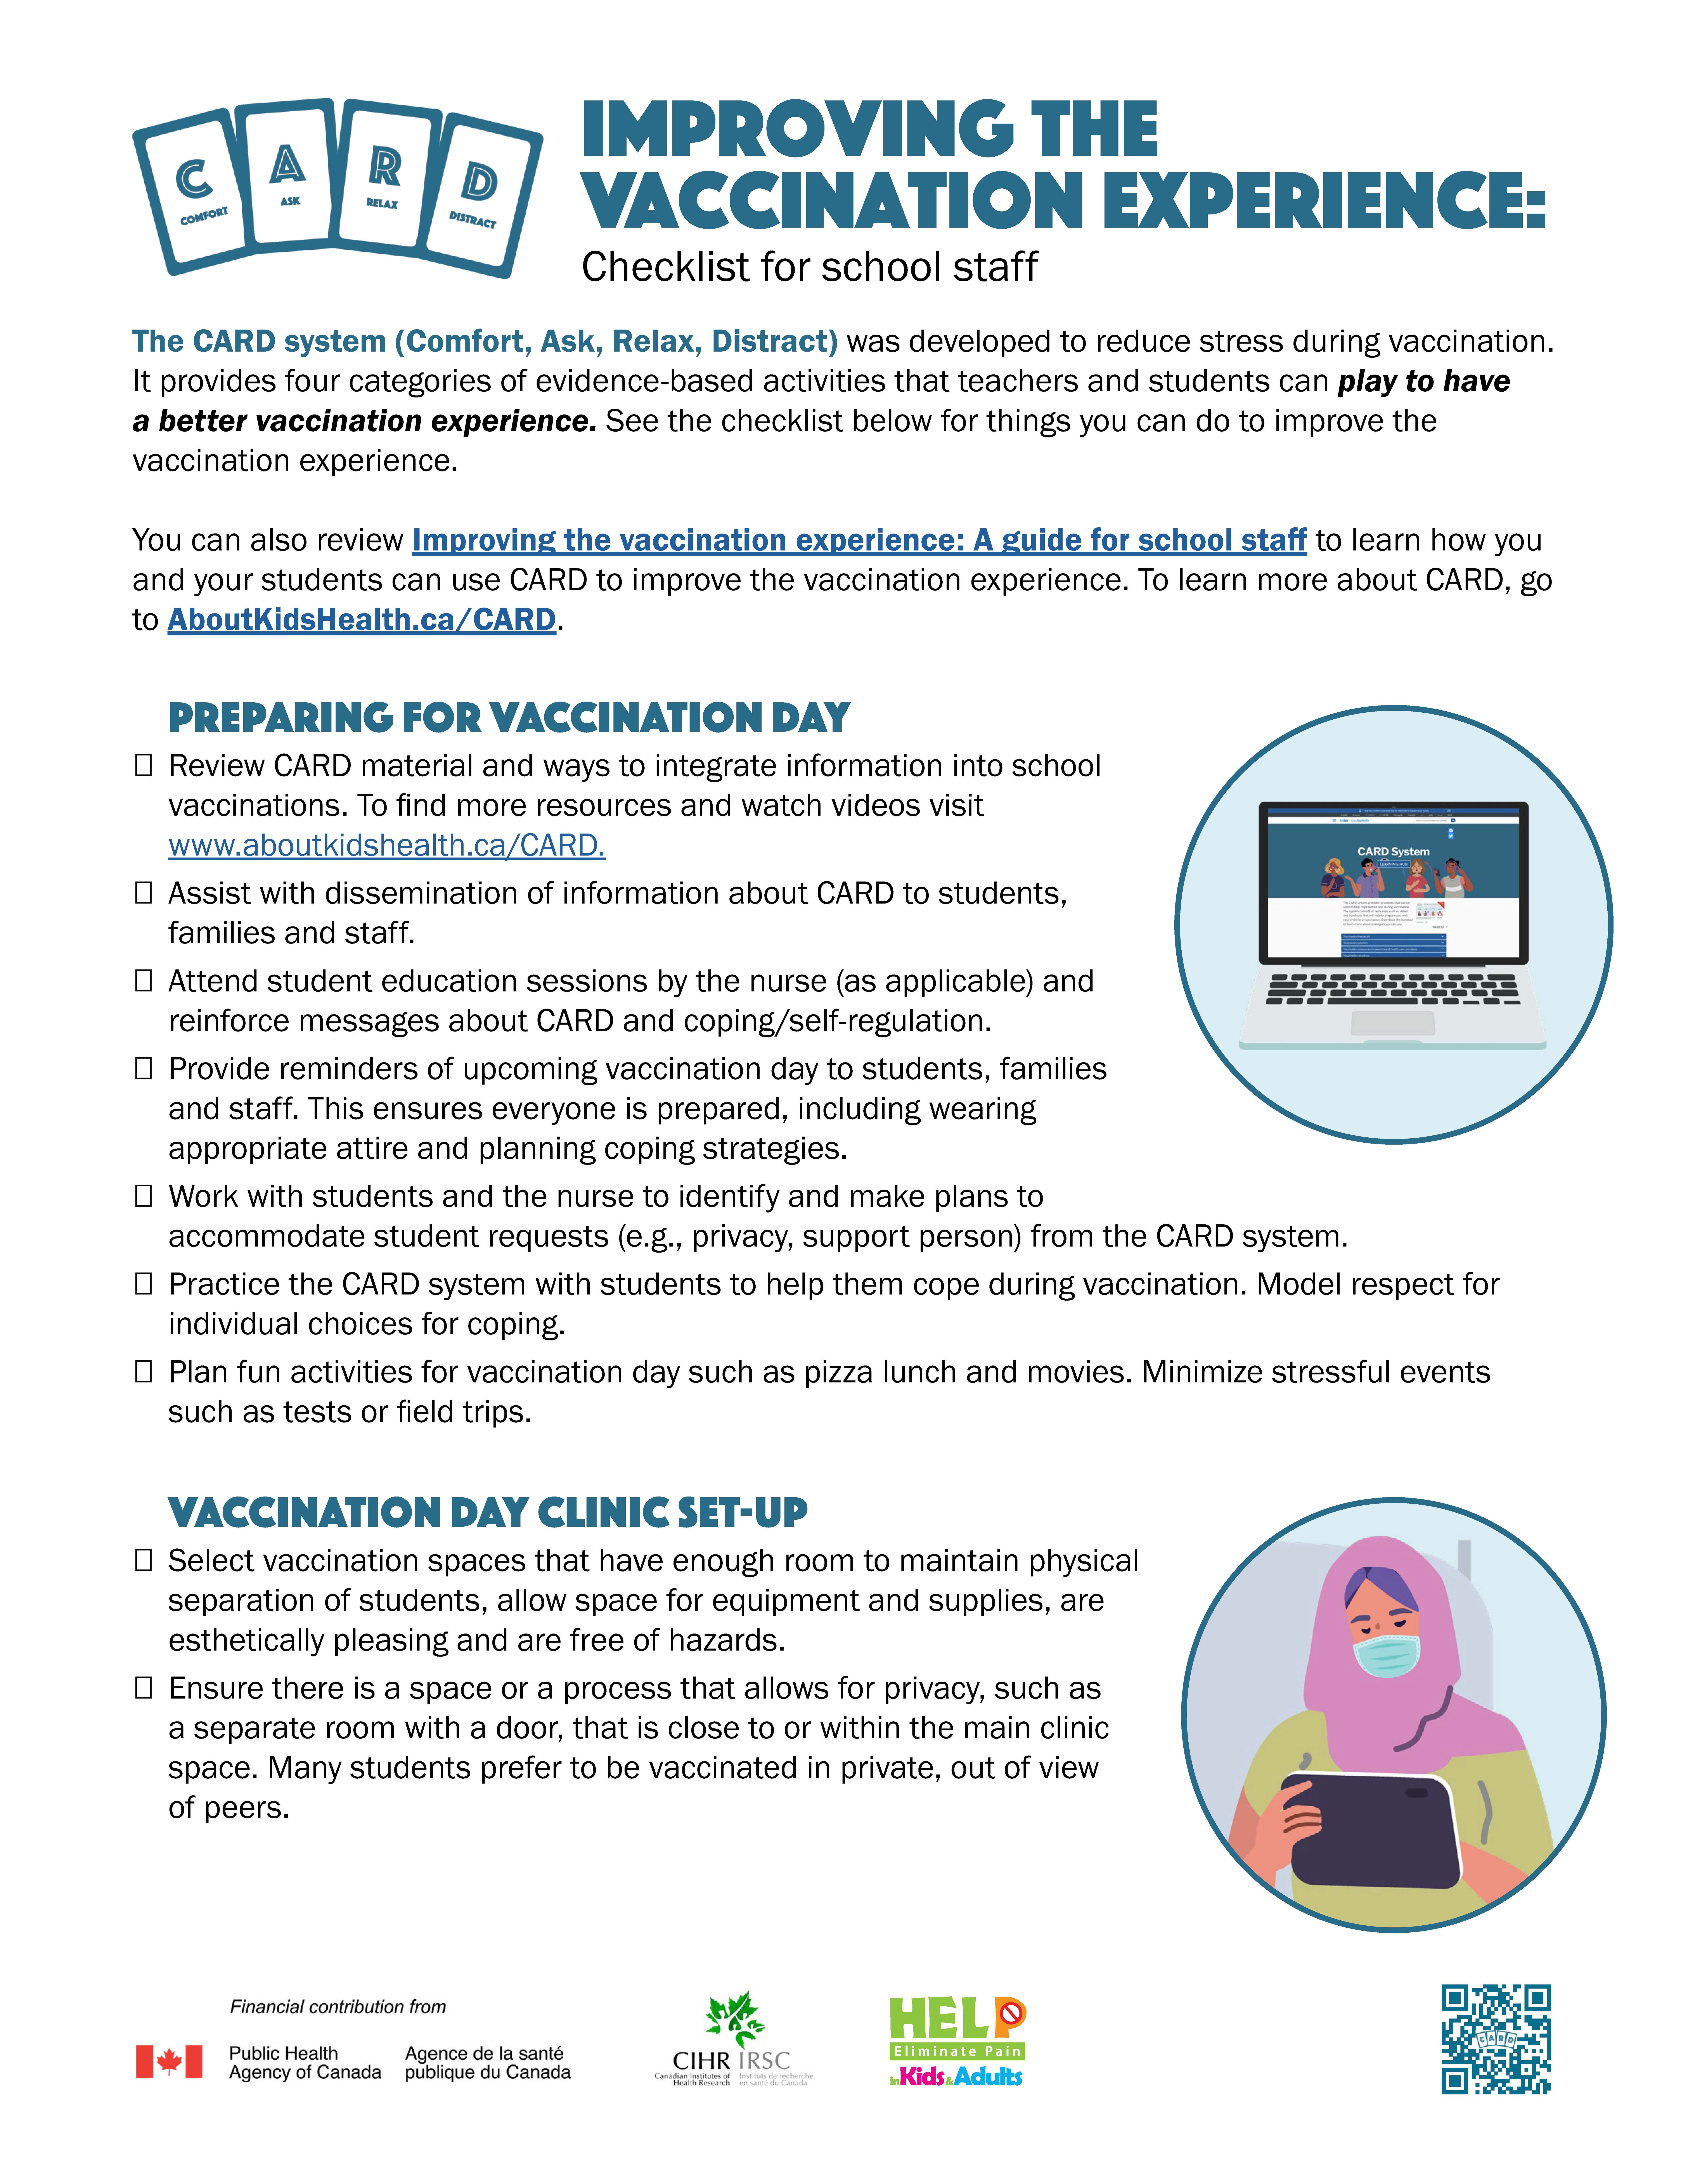 Improving the vaccination experience: Checklist for teachers